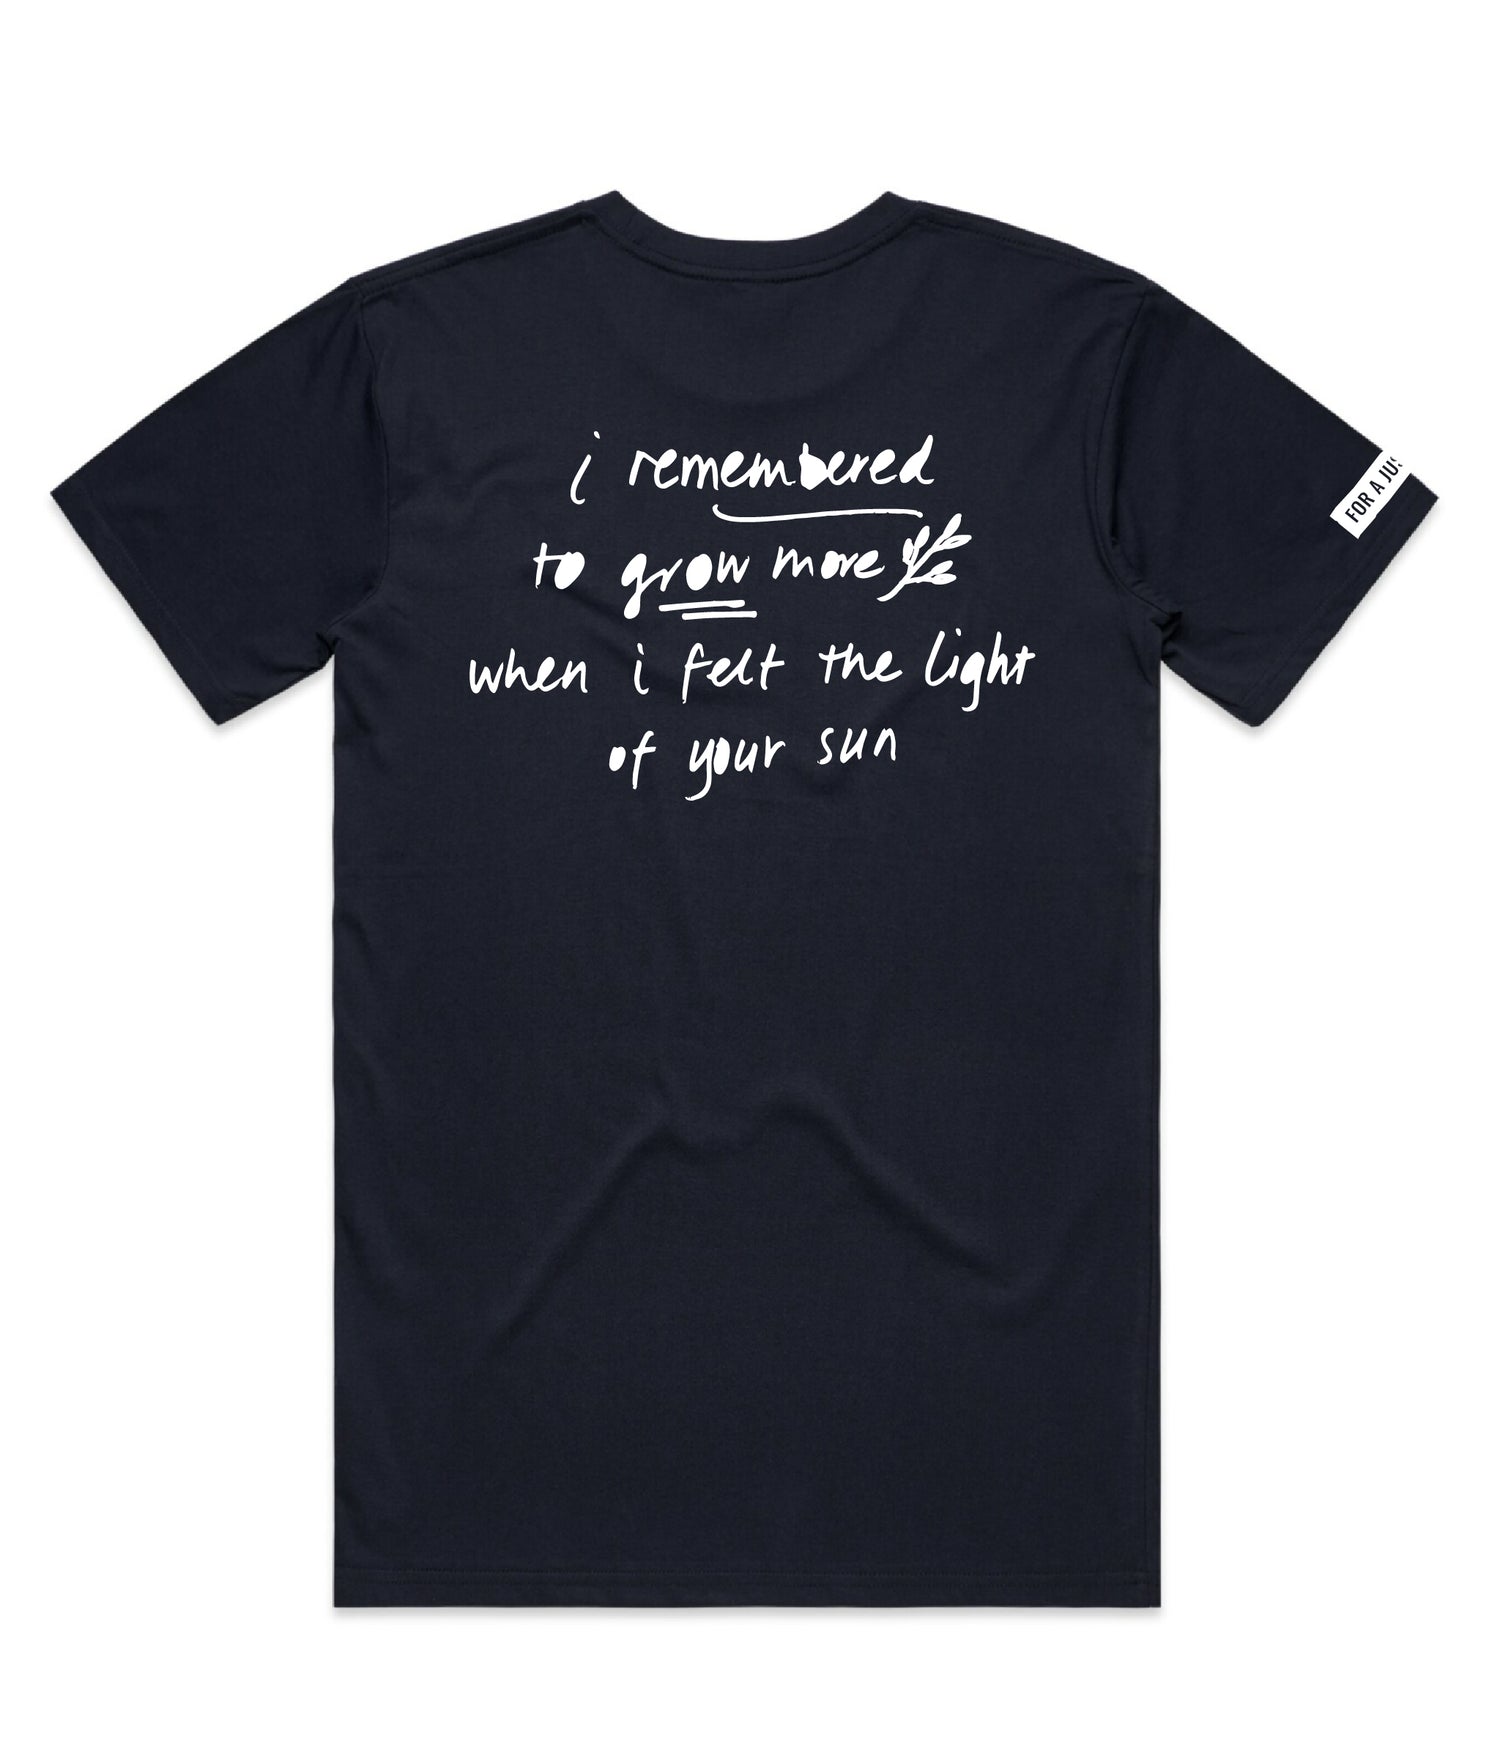 Kav Temperley wearing family domestic violence charity t shirt Flat lay of ink navy tshirt reading the words 'I remembered to grow more when I felt the light of your sun' in white